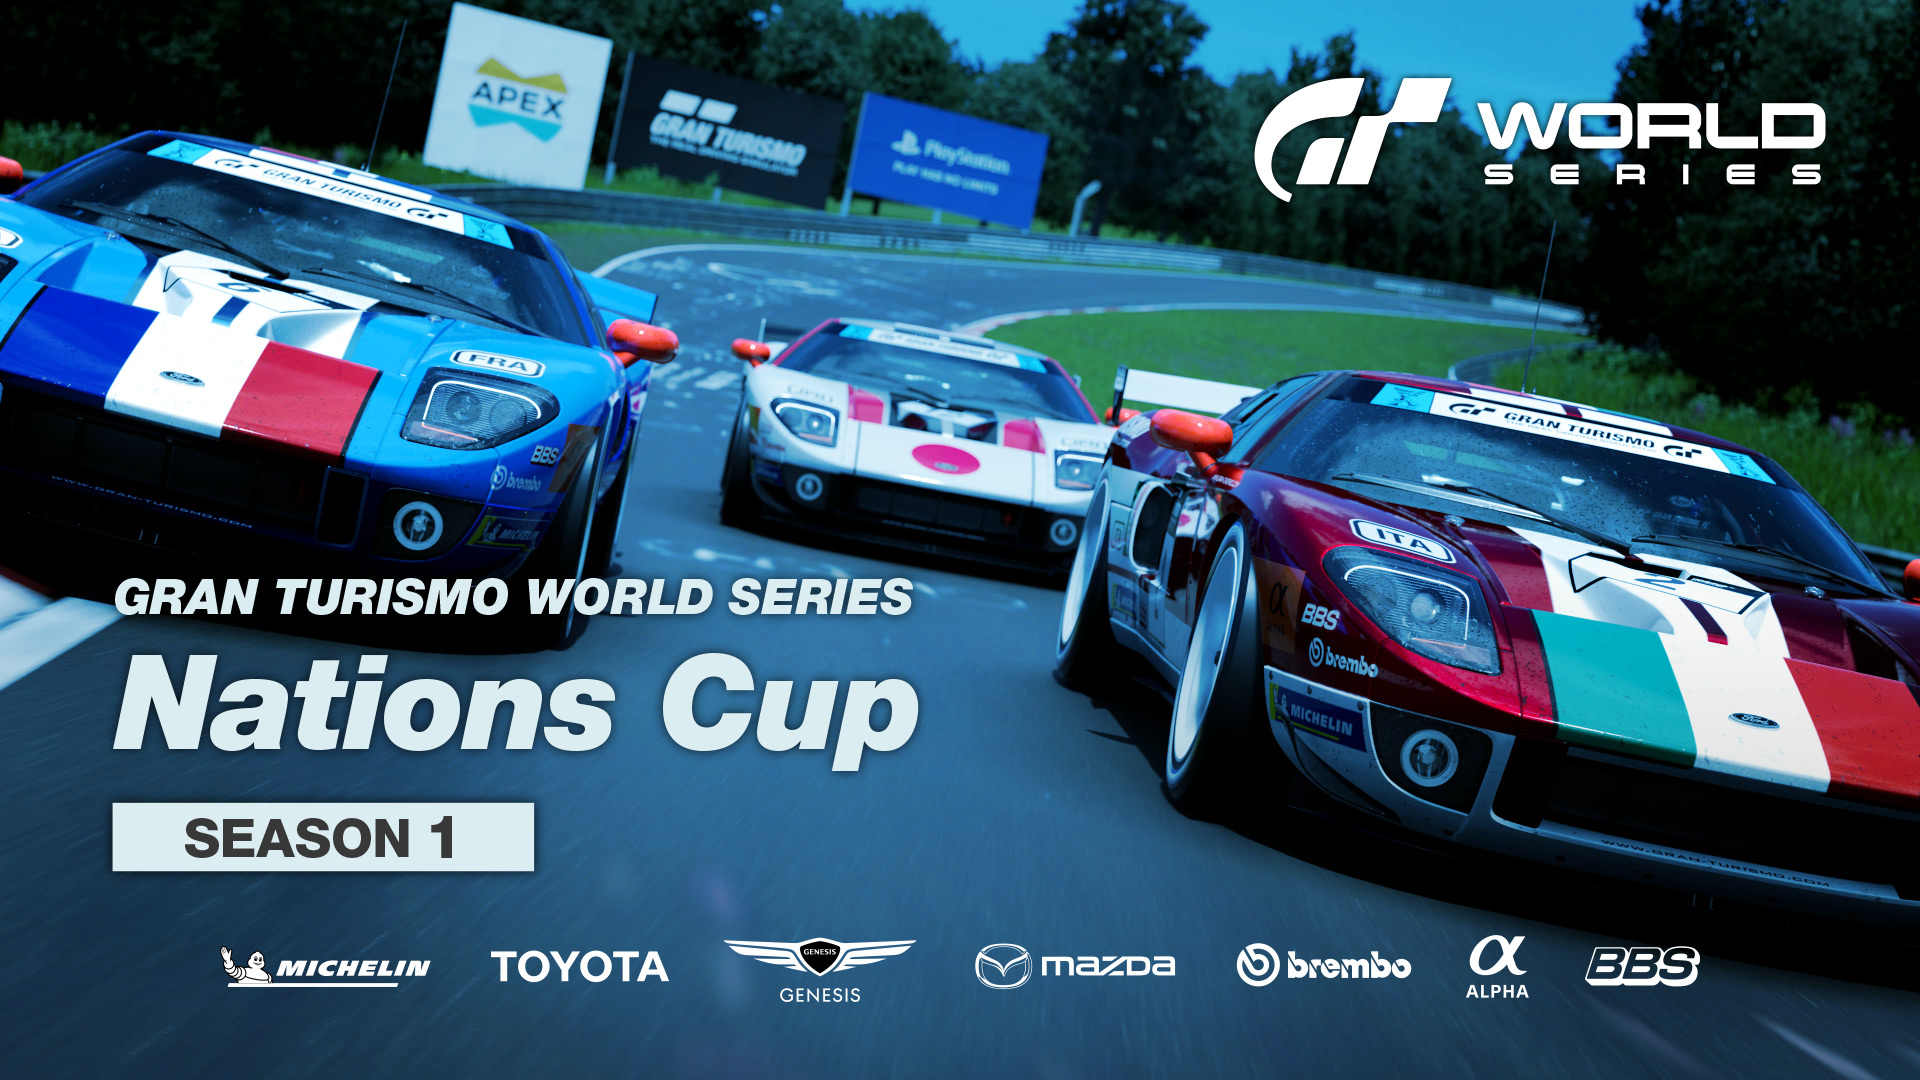 Opening of the 'Gran Turismo World Series' 2022 Nations Cup Season 1